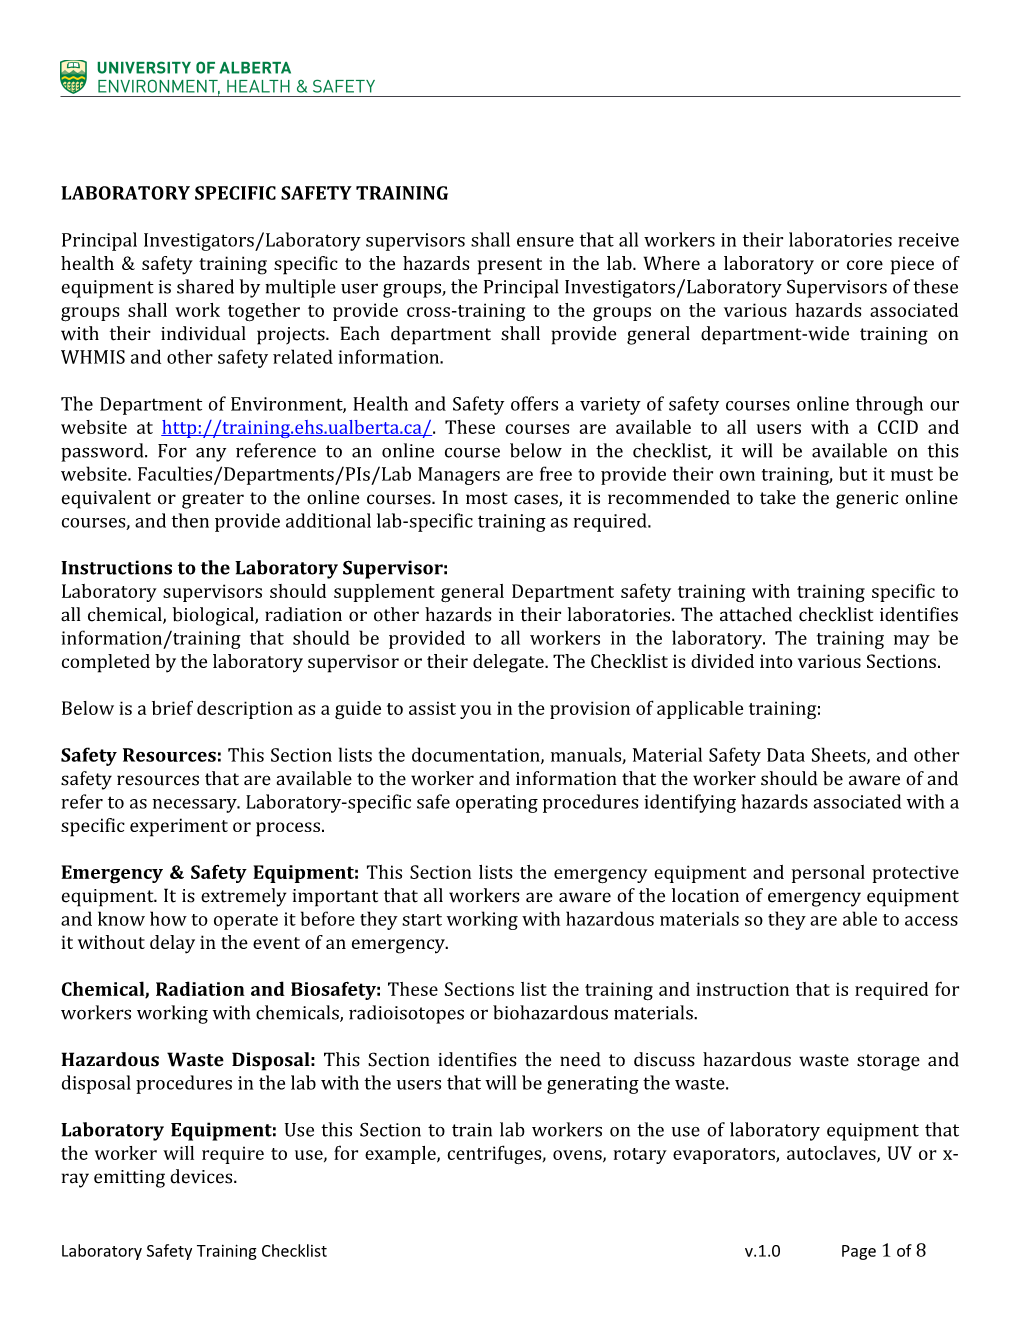 Laboratory Specific Safety Training